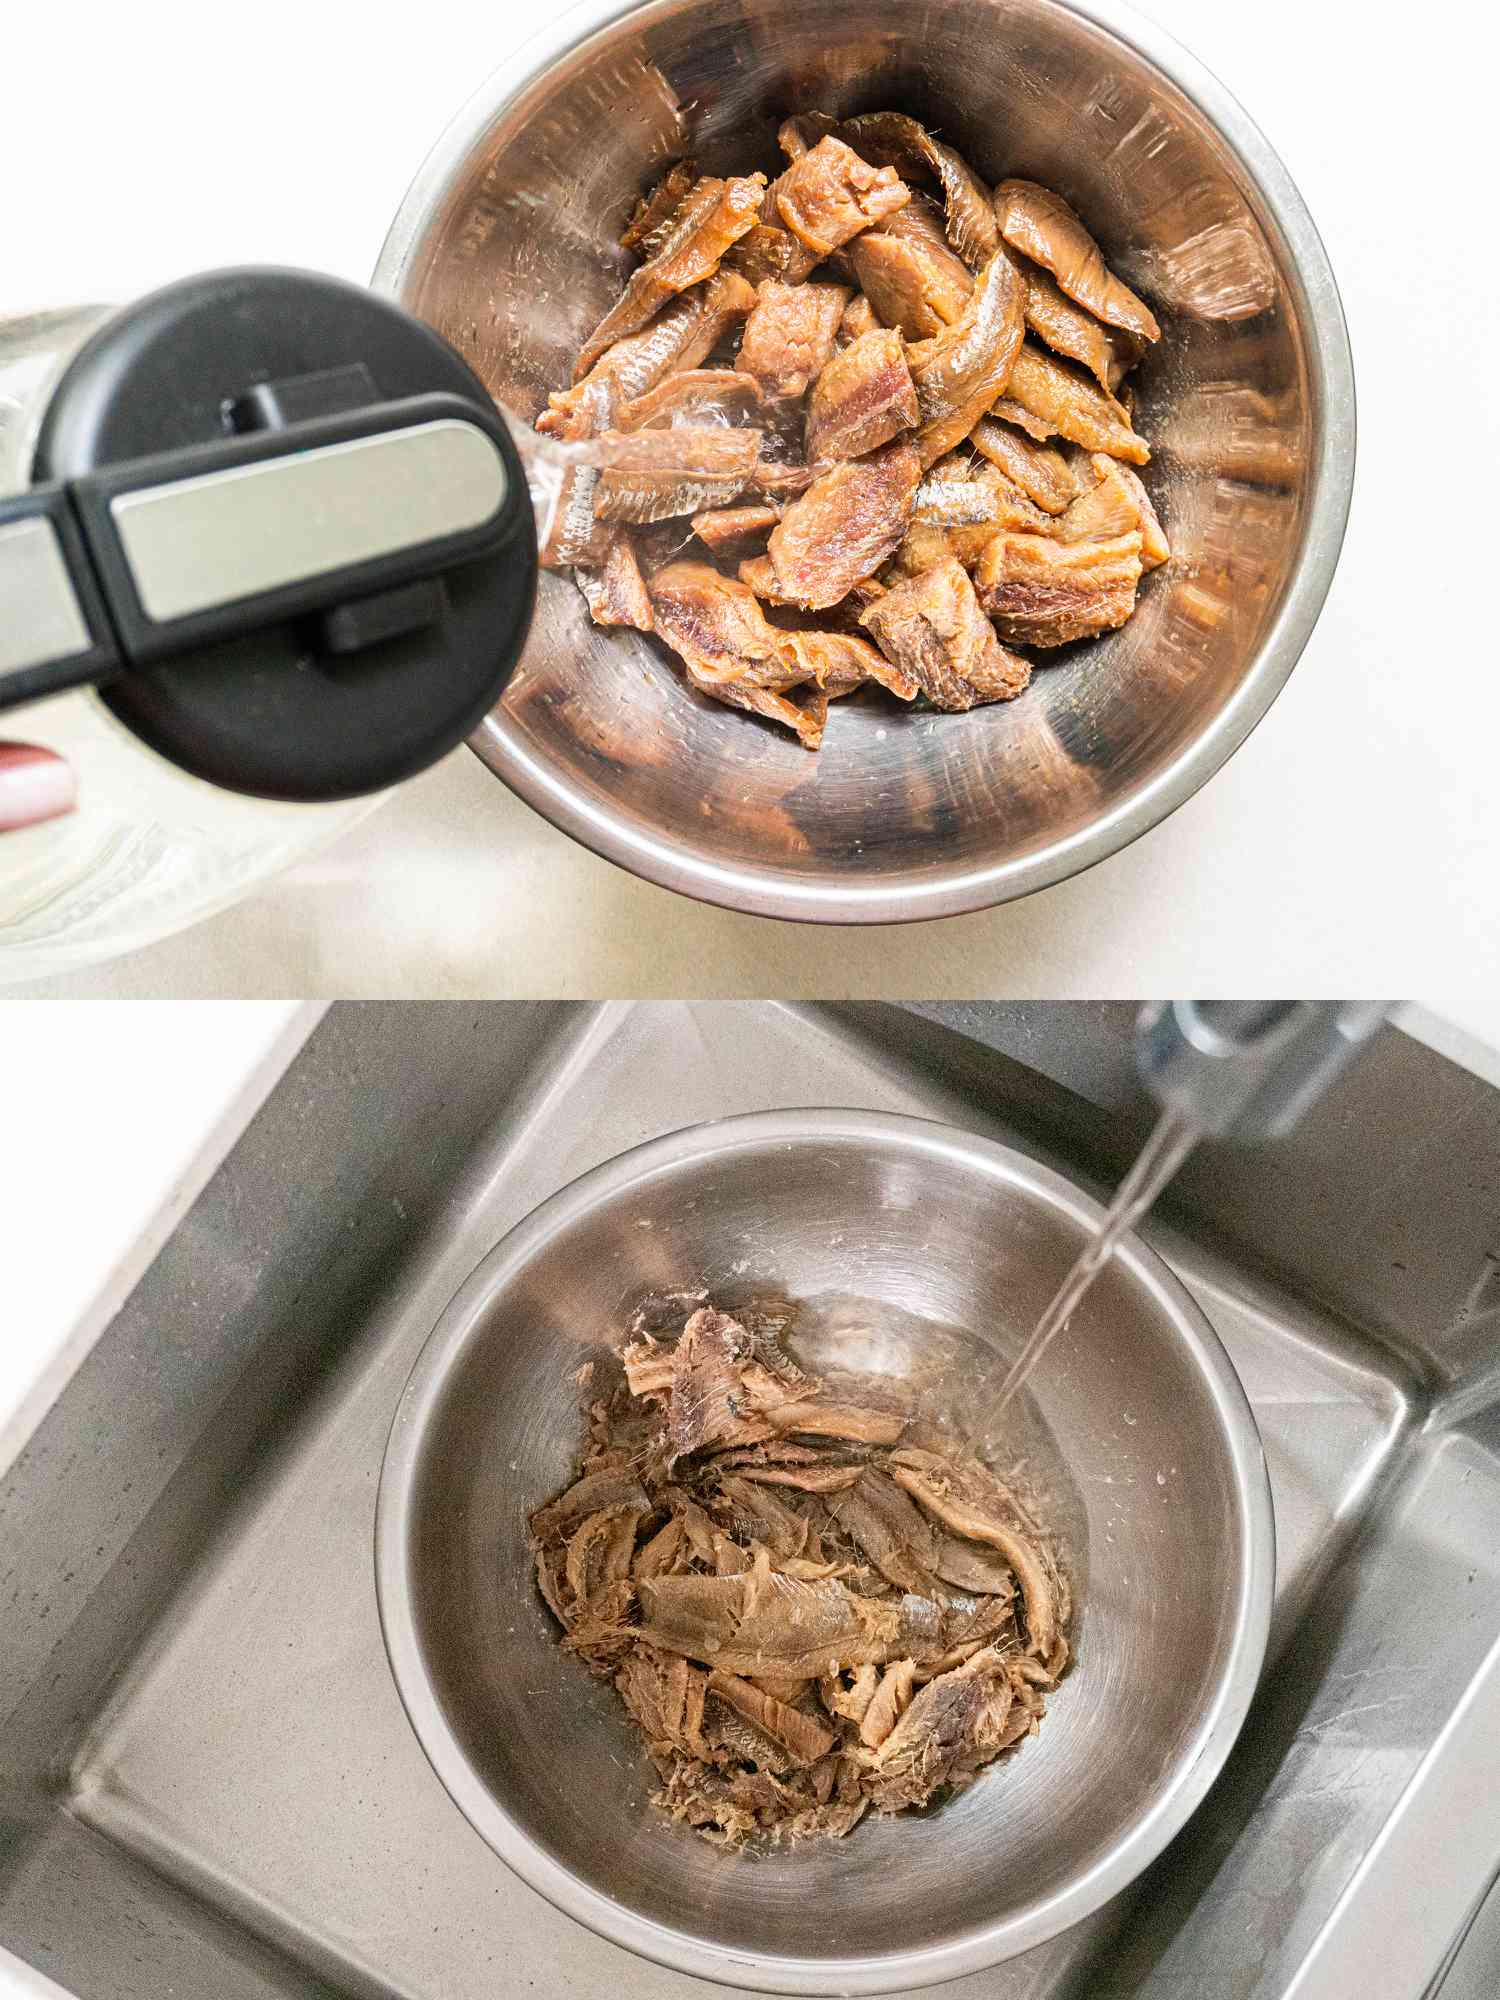 Two image collage of pouring boiling water over fish and rinsing it in sink